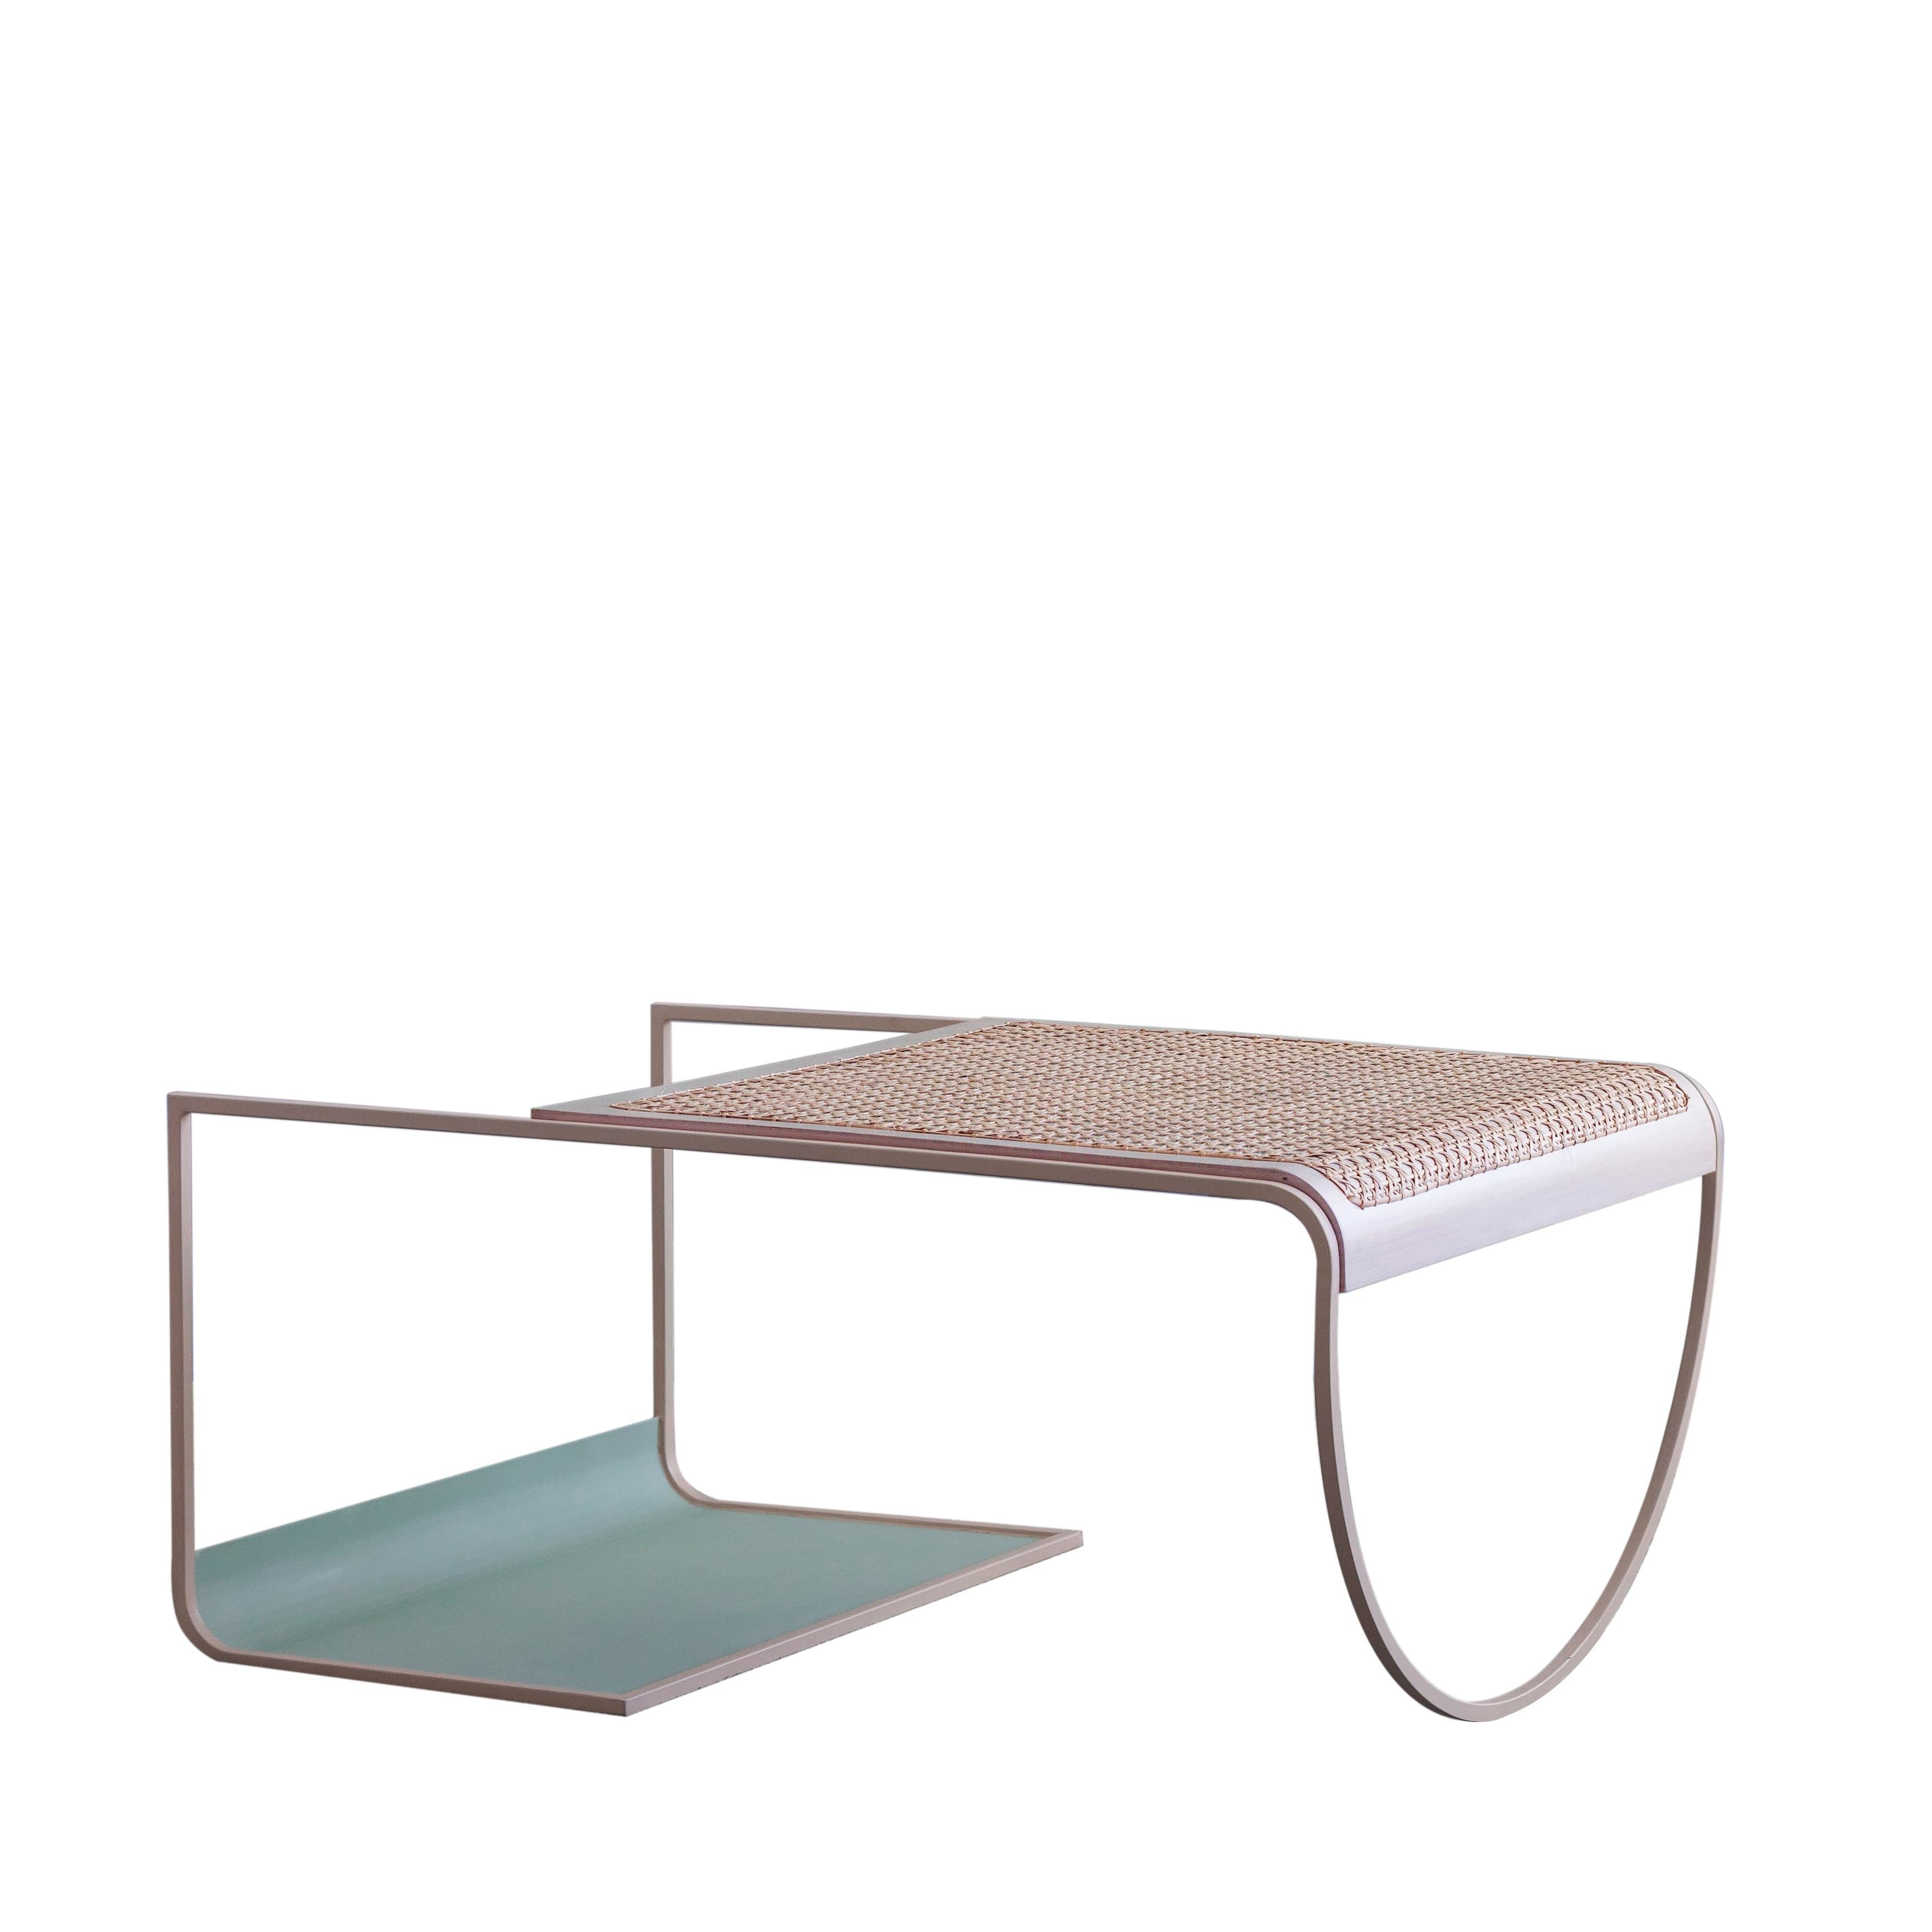 Cane SW coffee table by soft-geometry
Materials: Steel, handwoven cane
Dimensions: 36 x 24.5 x 17” H 

Simple, playful geometries form the light and fluid sw cane coffee table. The table perched on an arched-belly base on one side and a rolled